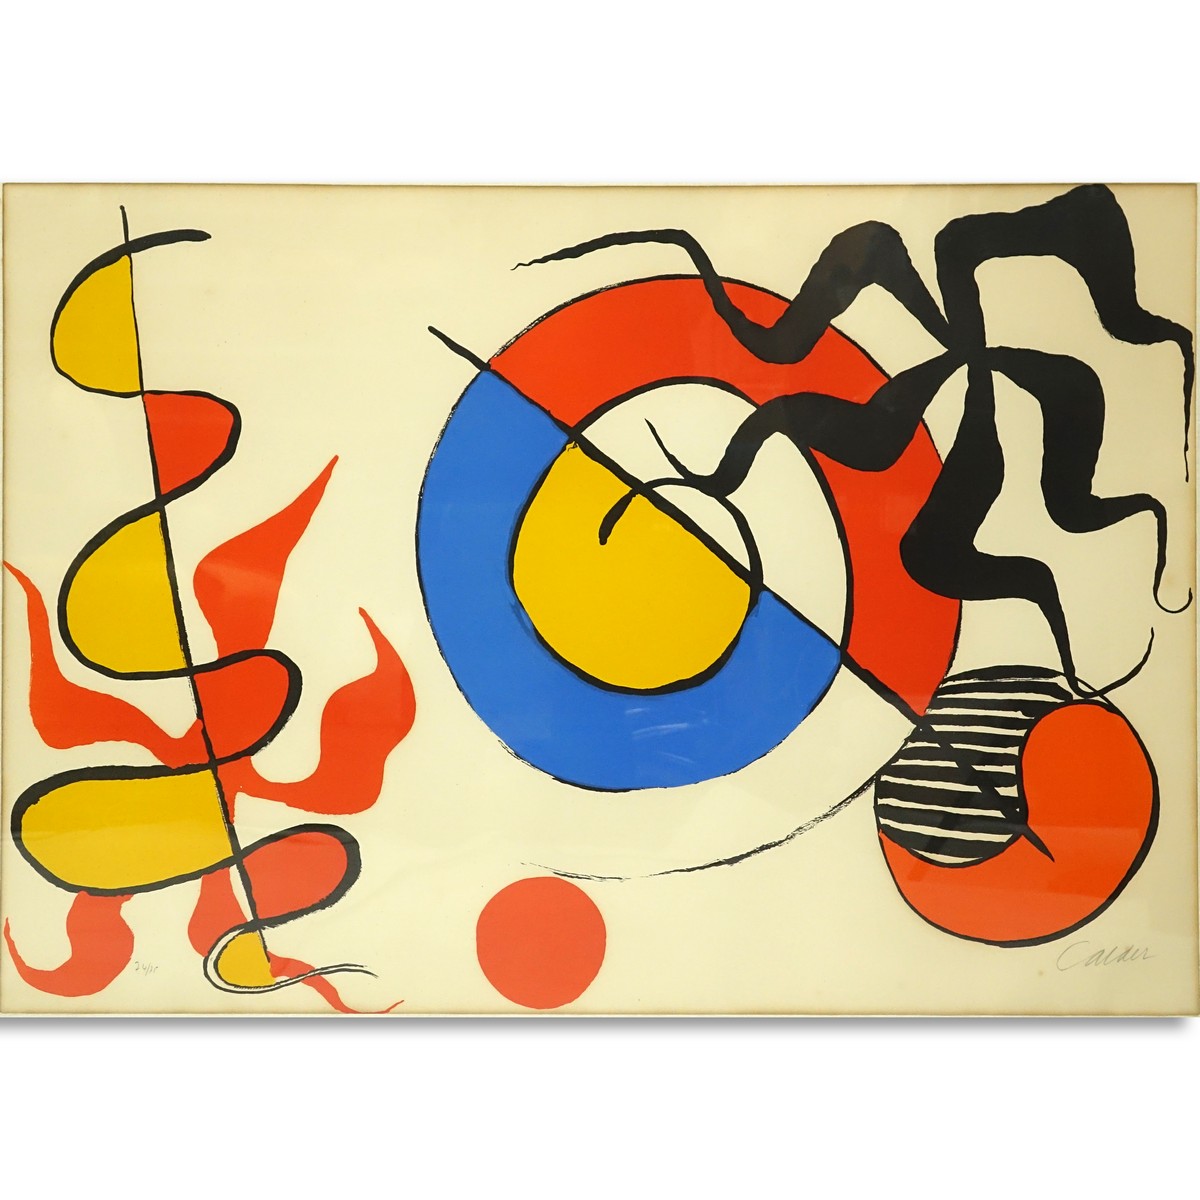 Alexander (Sandy) Calder, American (1898 - 1976) Color lithograph "Spirale Et Poulee". Signed in pencil and numbered 24/75, gallery label" Far Gallery, New York.